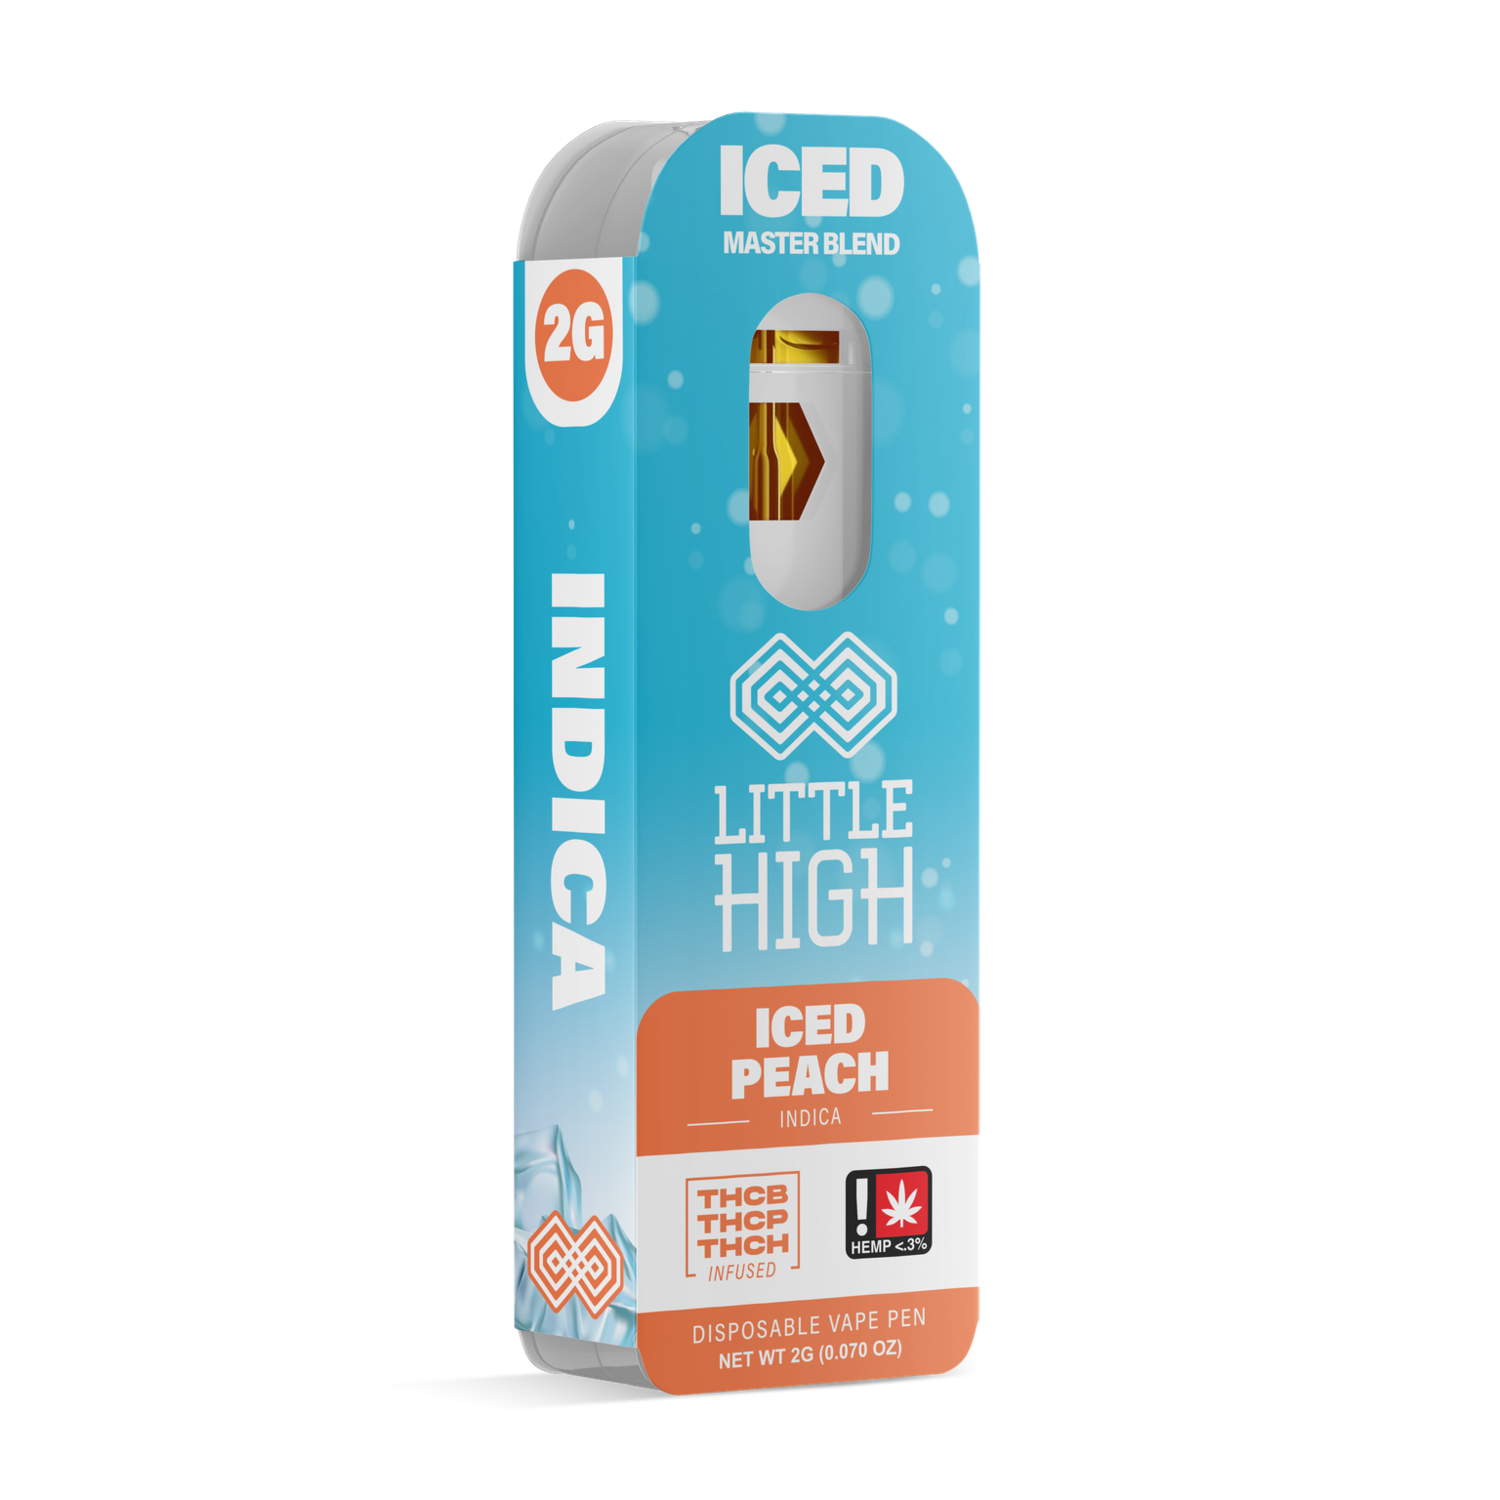 Little High - Iced - THCB - Peach - 2G - Indica - Disposable